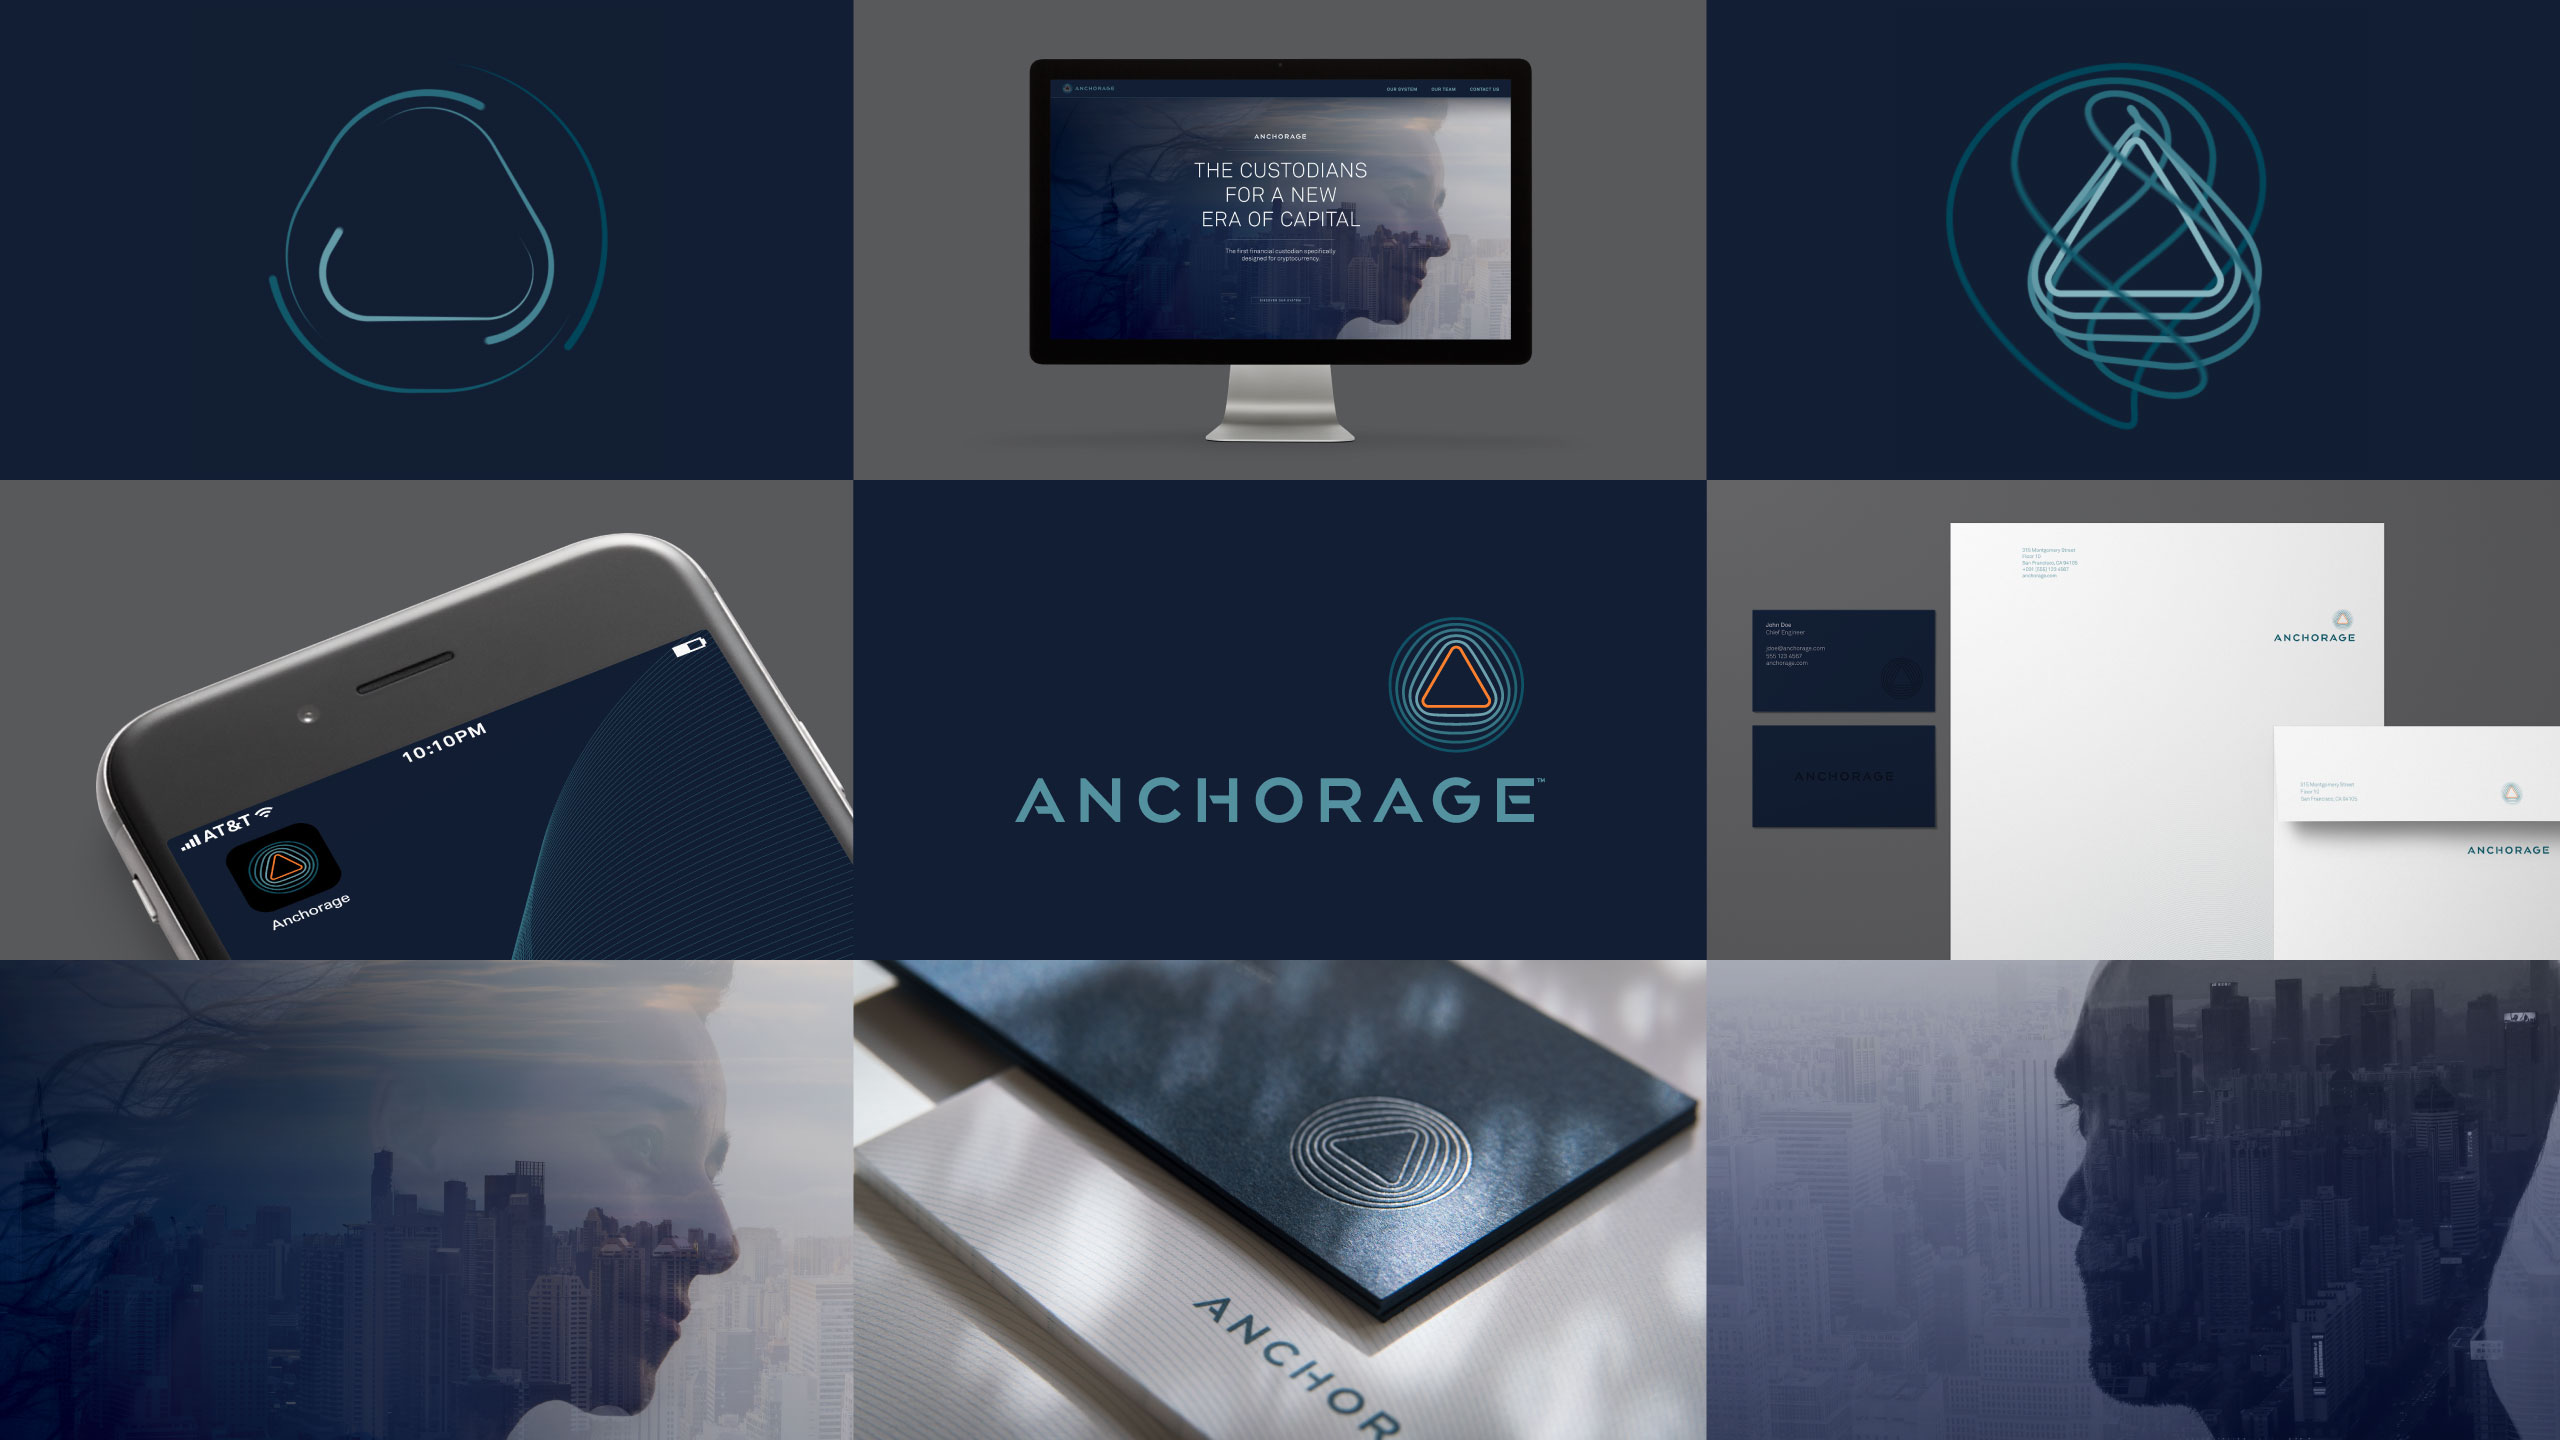 Overview of our identity system for Anchorage